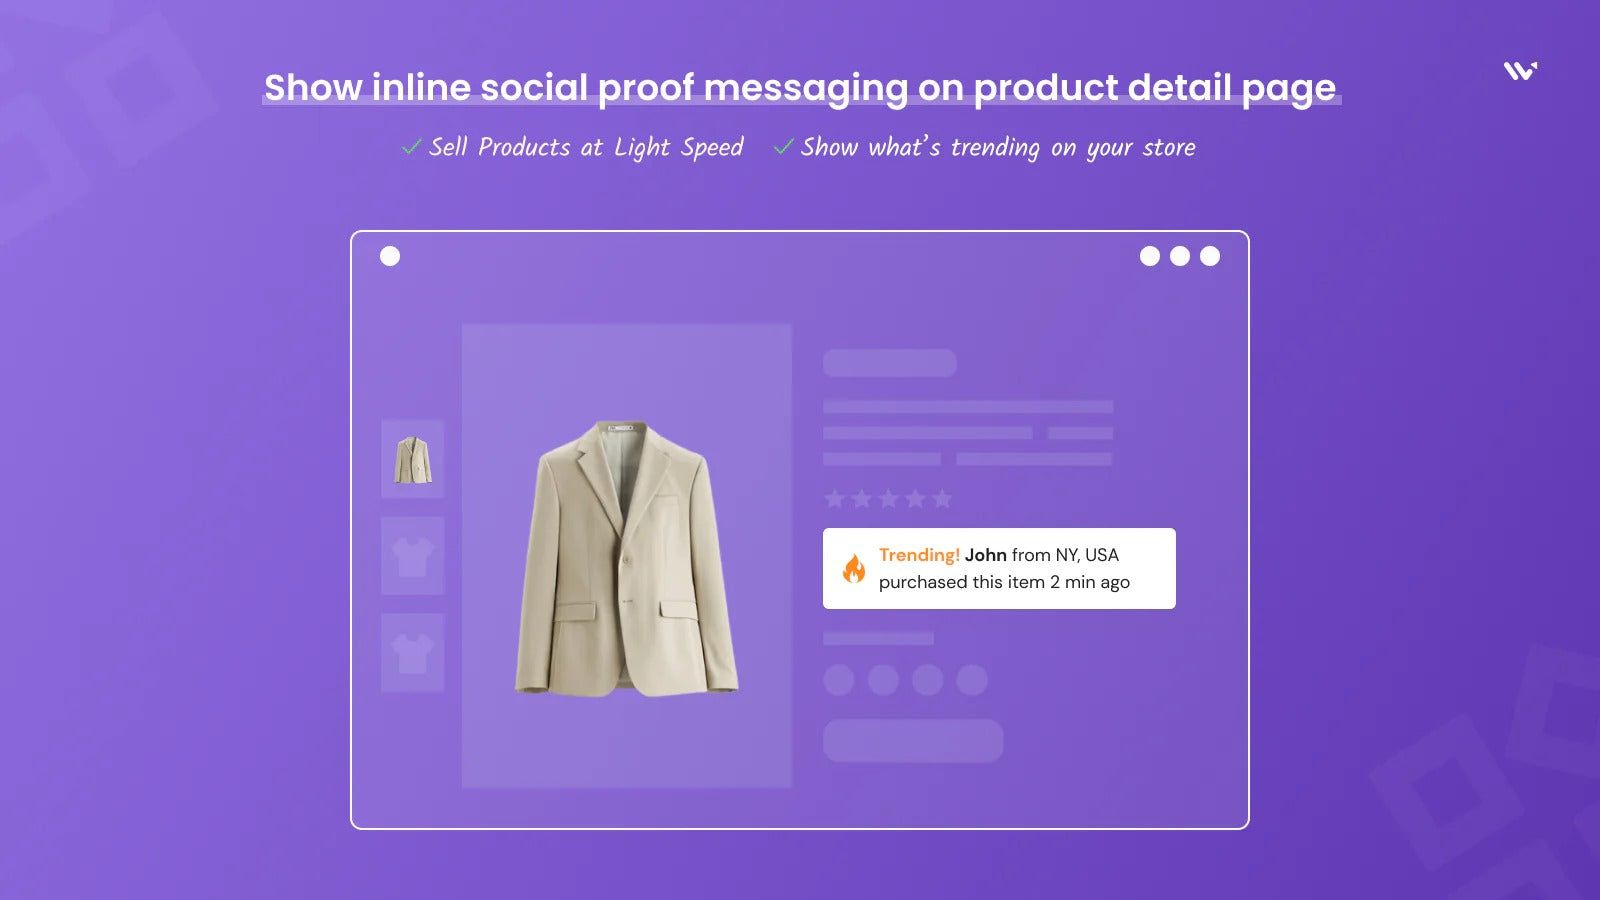 Show inline social proof messaging on product catalogue page